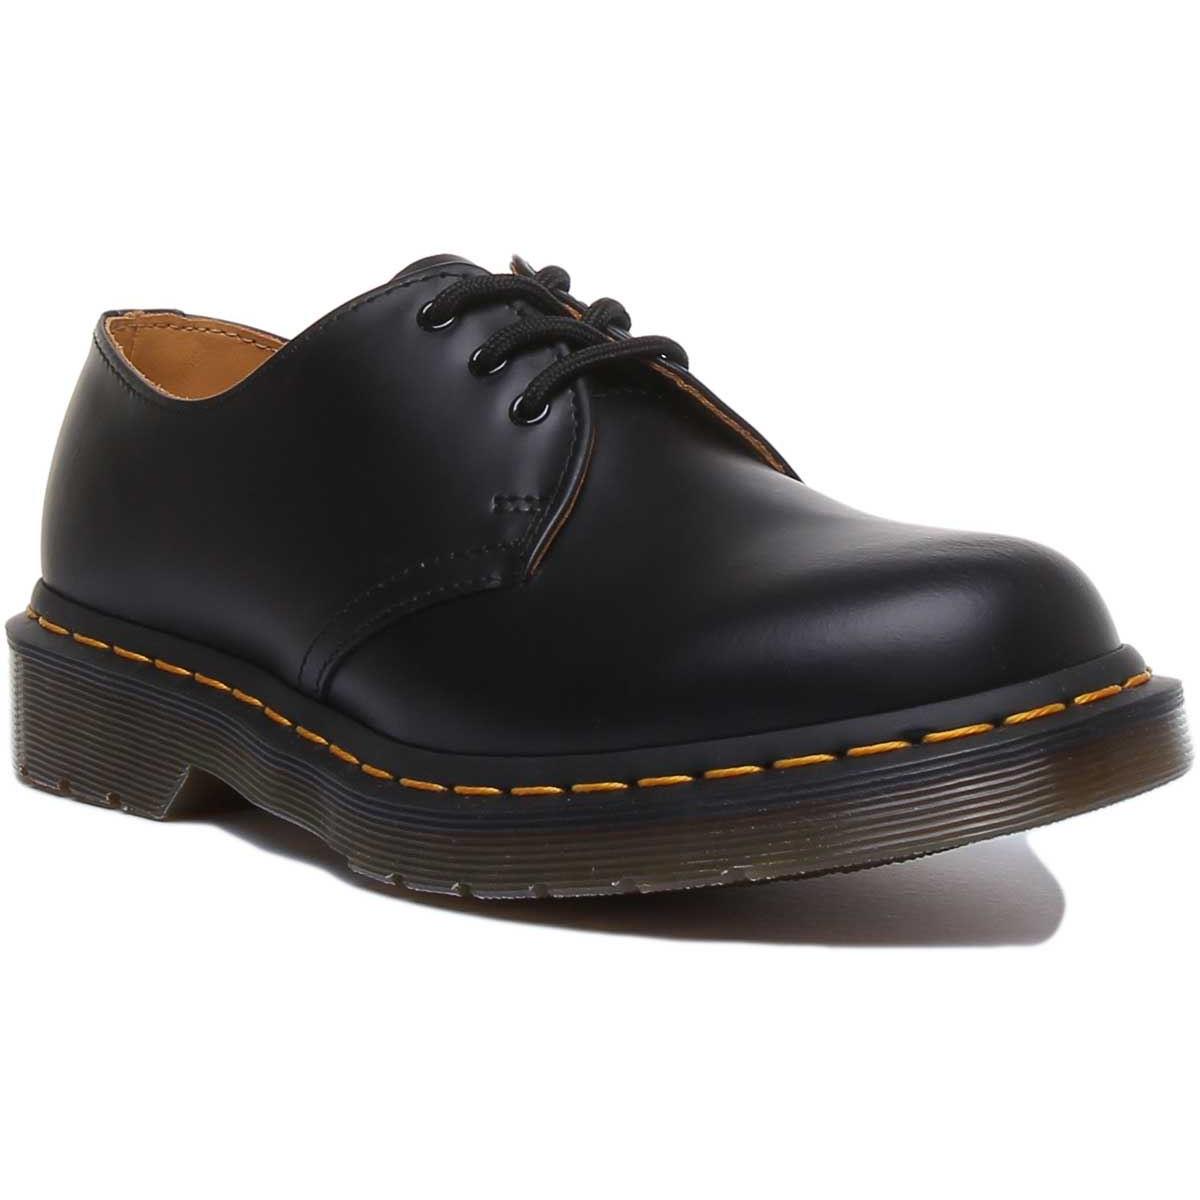 Dr Martens 1461 3 Eyelet Shoe Yellow Stich In Black Size US 4 - 13 BLACK